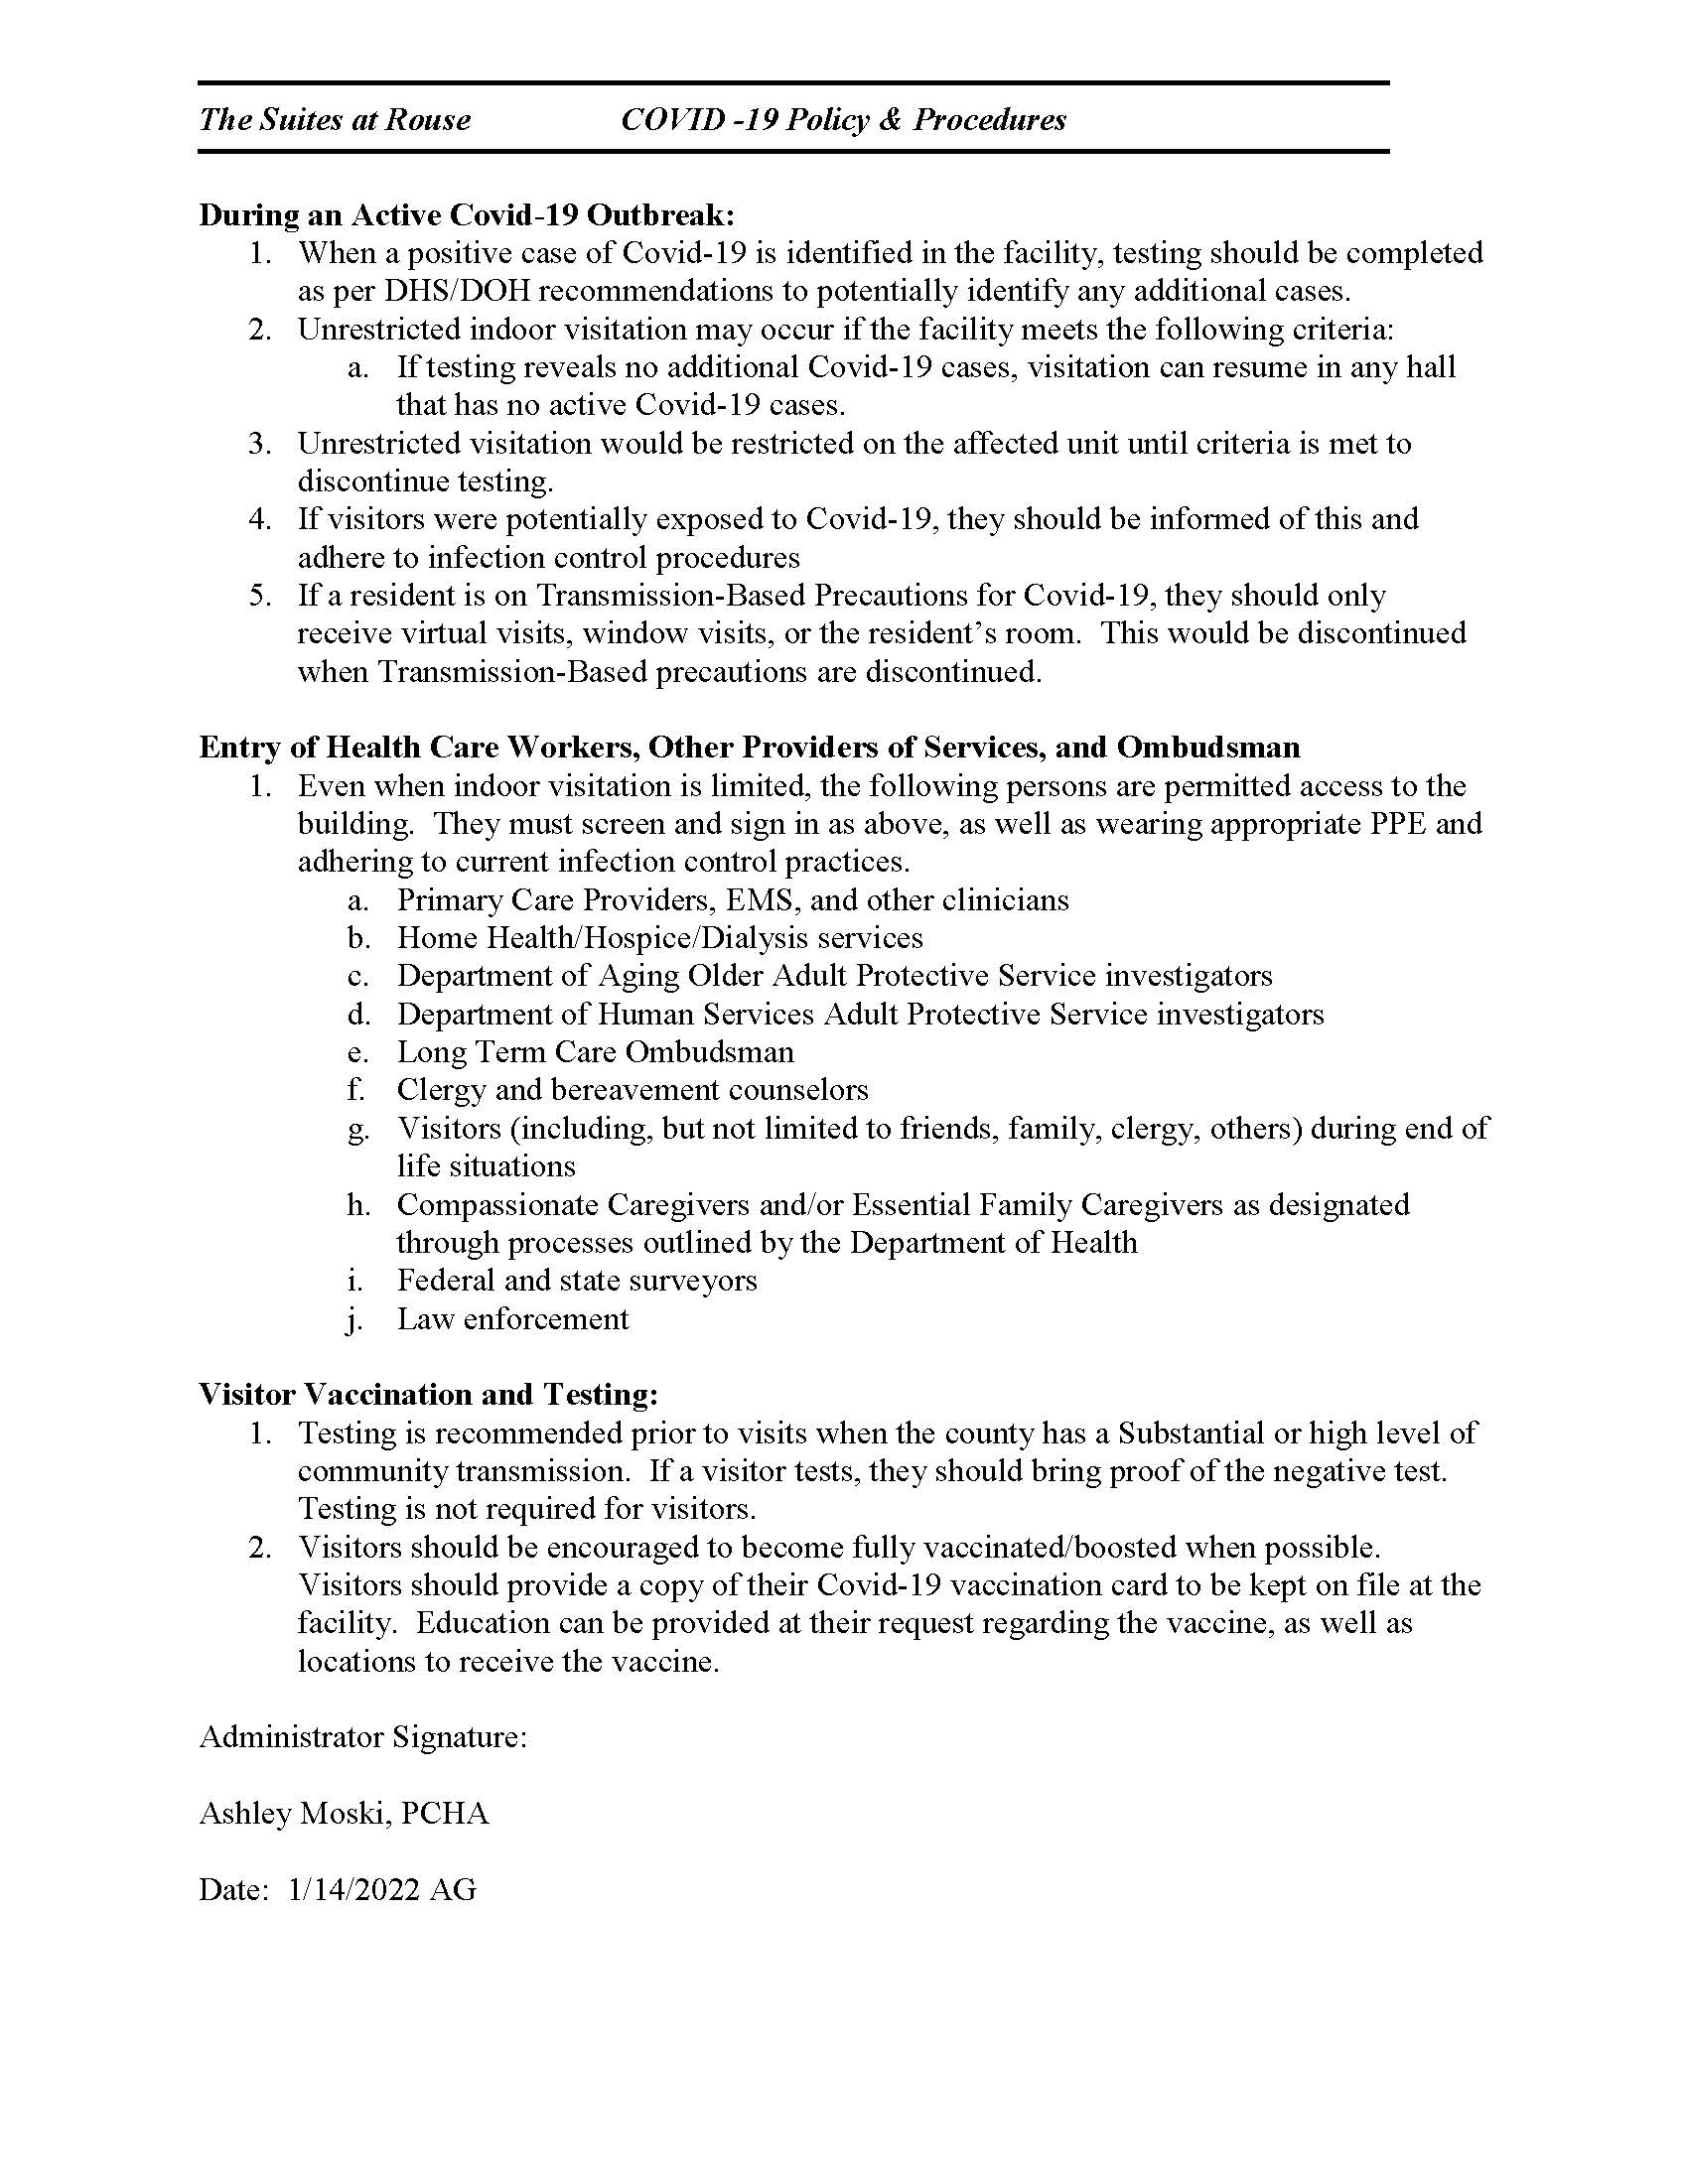 4Suites COVID Visitaiton Policy 1.14.22 Page 2